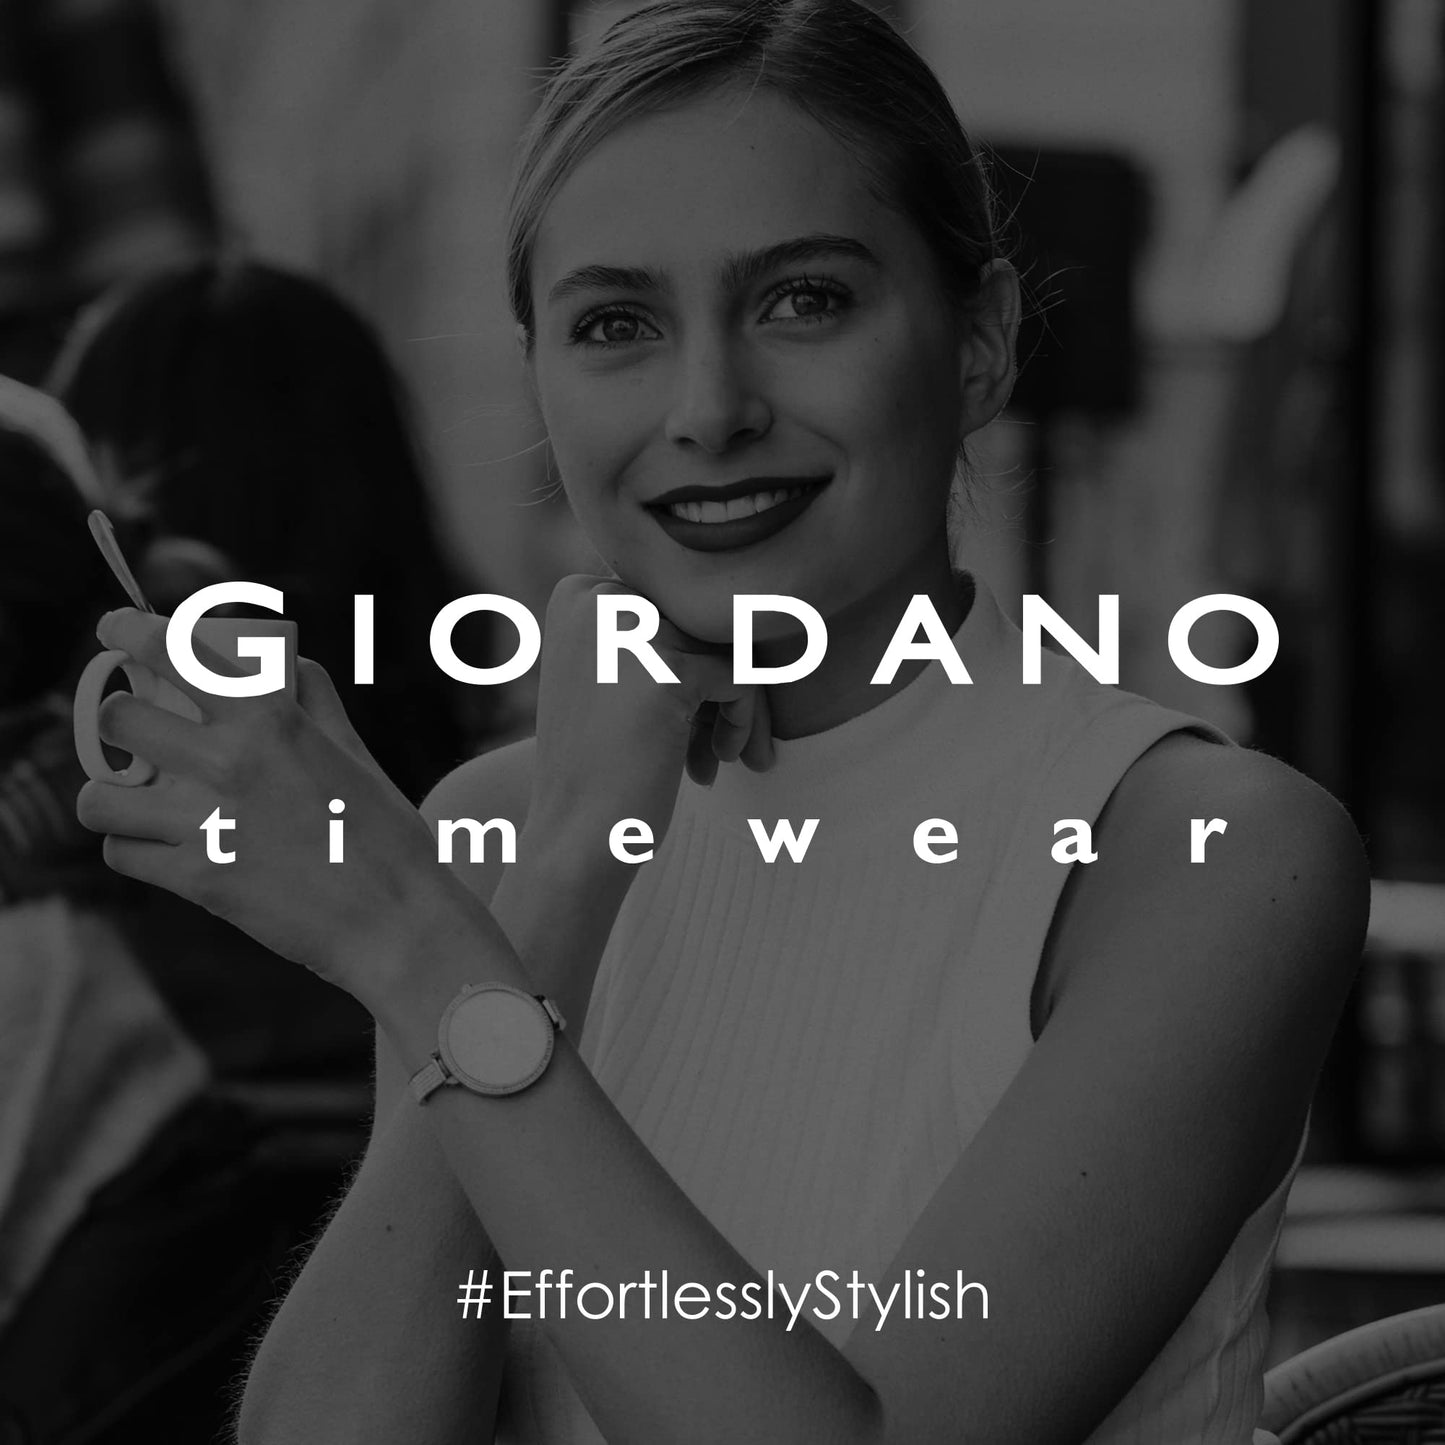 Giordano Analog Stylish Watch for Women Water Resistant Fashion Watch Round Shape with 3 Hand Mechanism Wrist Watch to Compliment Your Look/Ideal Gift for Female - GZ-60079-11